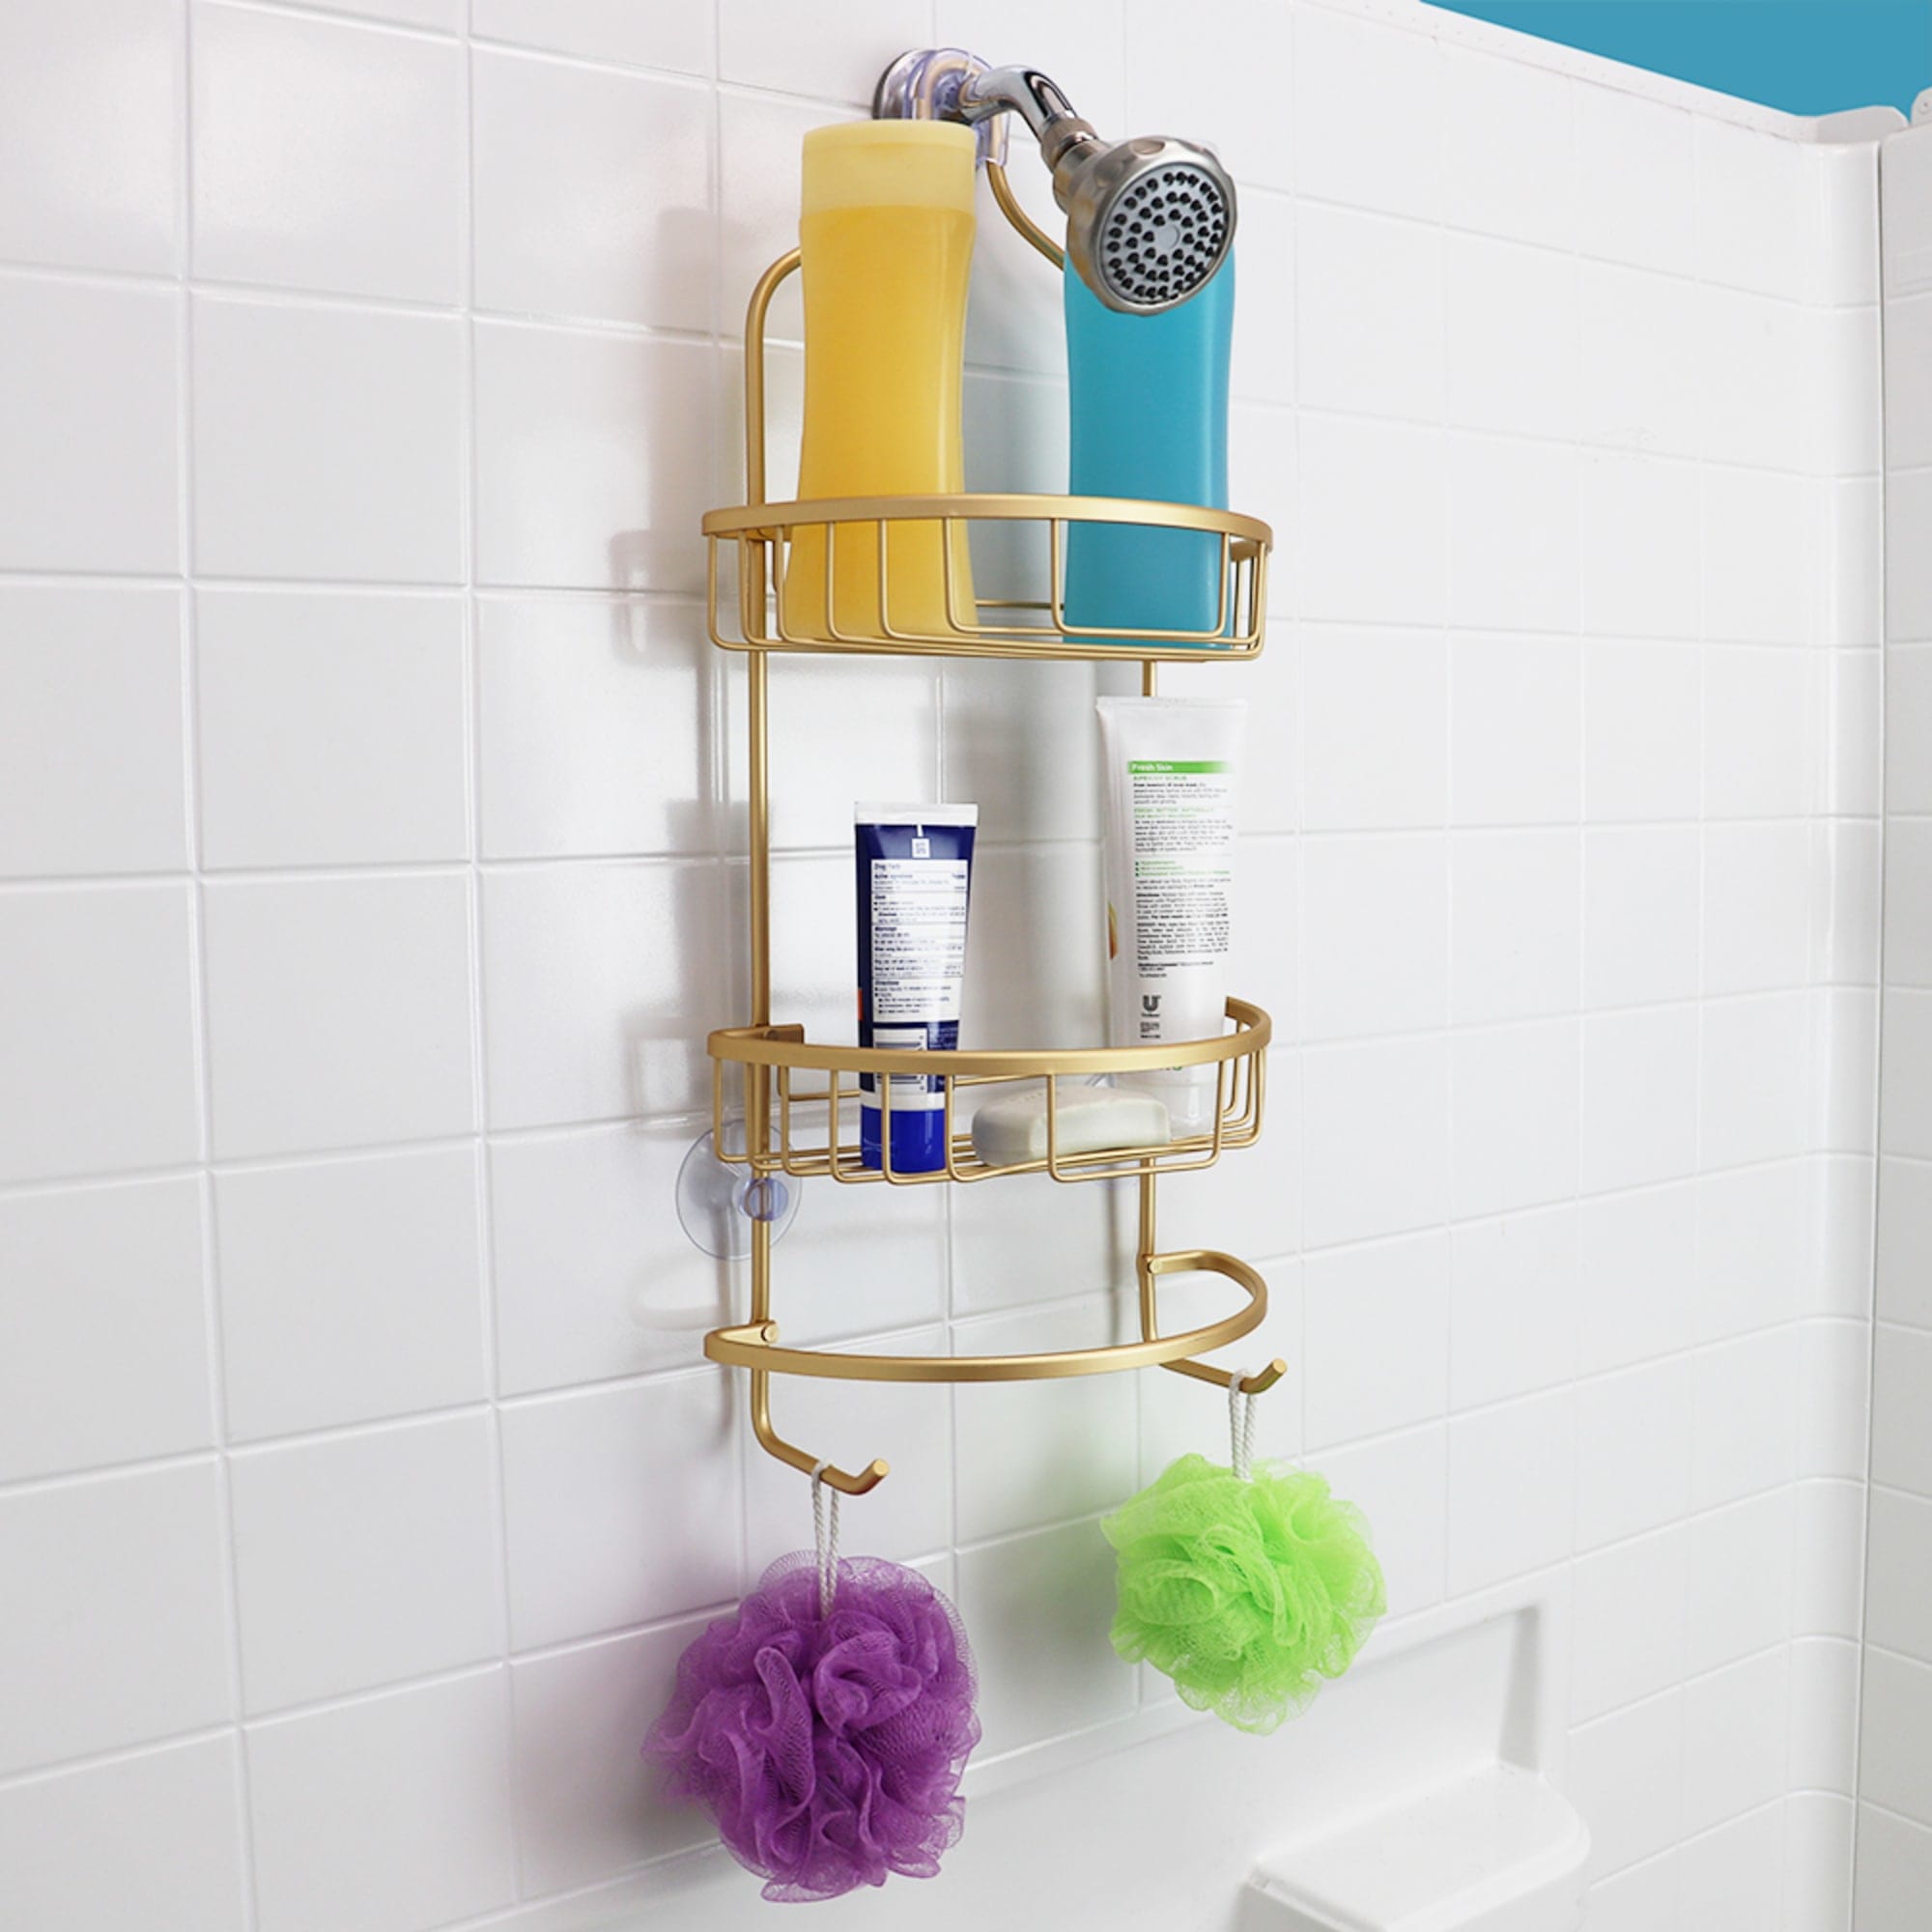 Home Basics 2 Tier Aluminum Suctioned Shower Caddy with Towel Rack and Integrated Hooks, Gold $15 EACH, CASE PACK OF 6